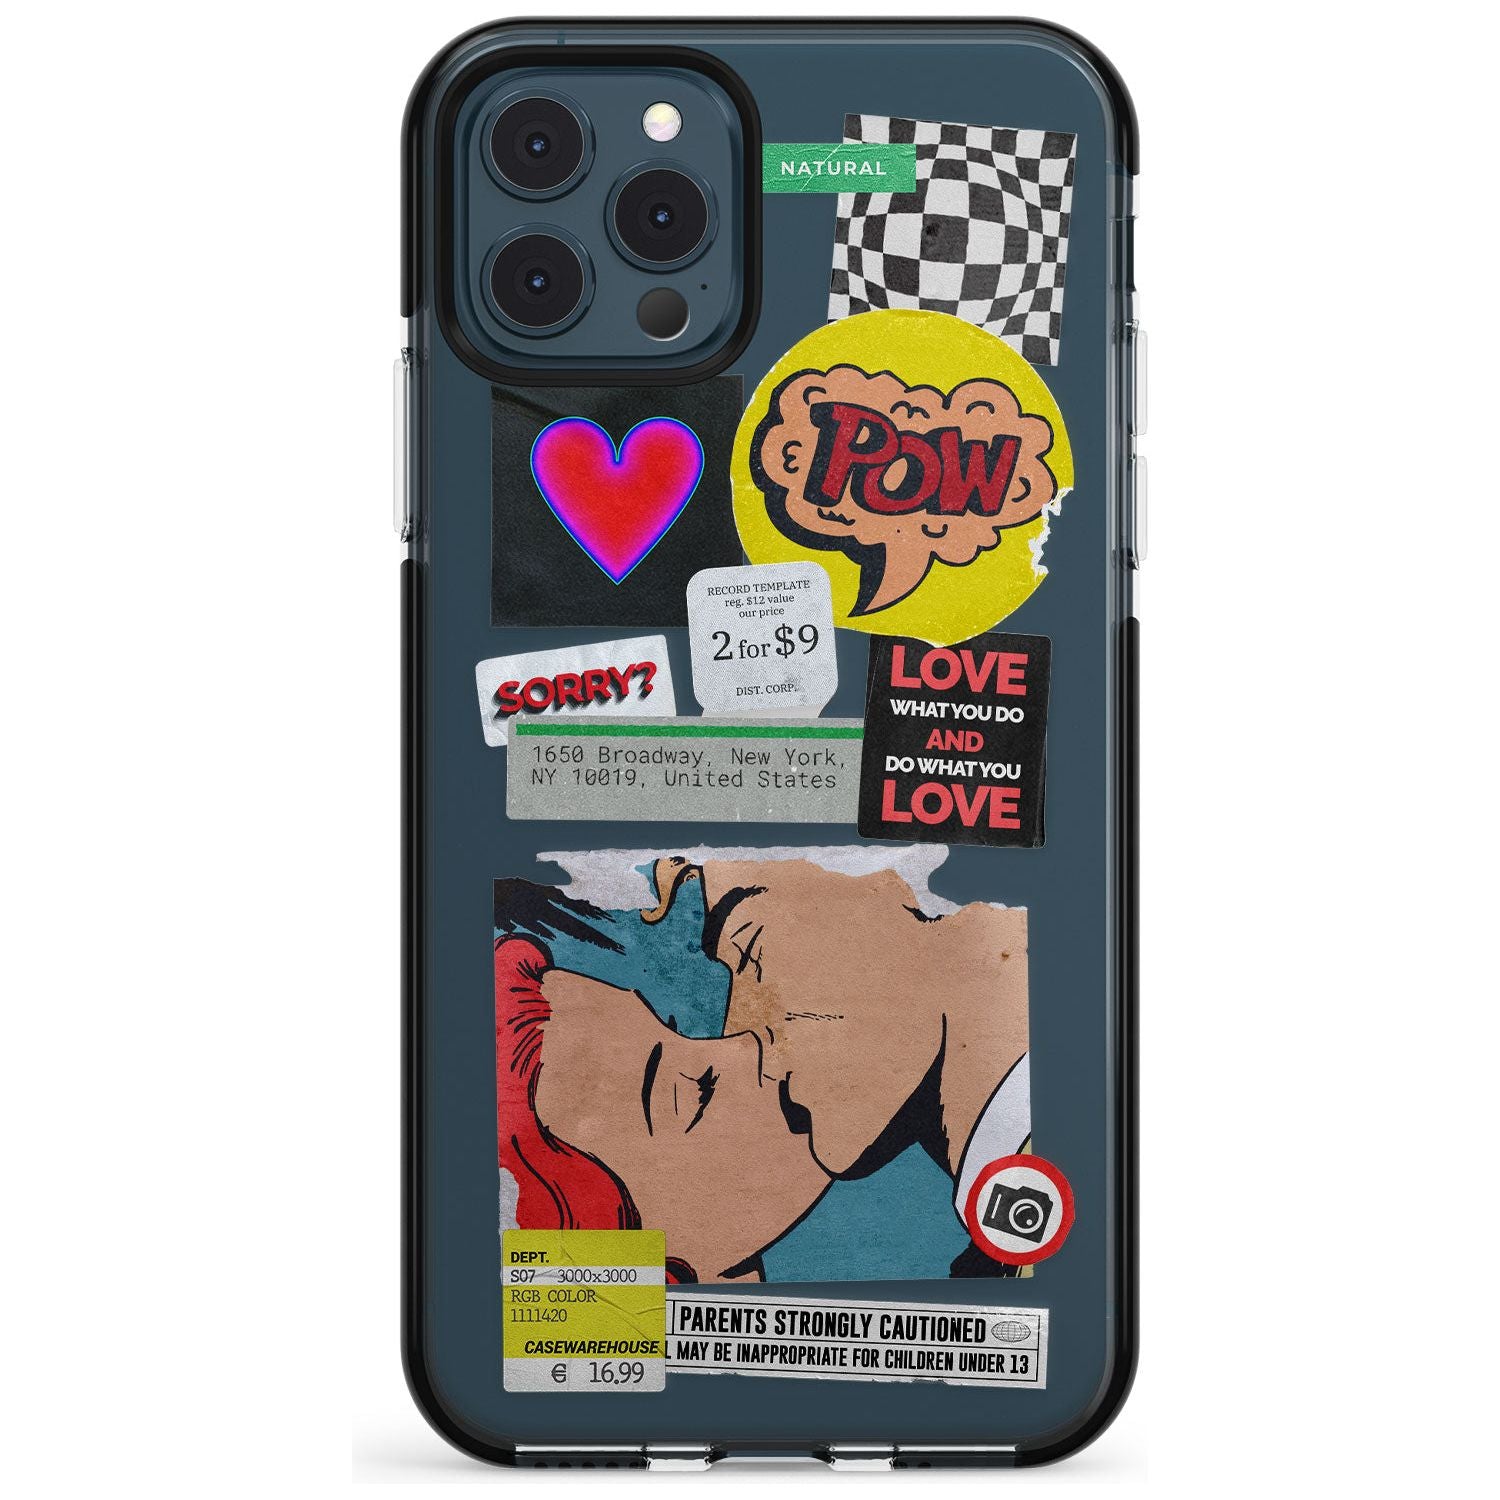 Retro Sticker Mix Pink Fade Impact Phone Case for iPhone 11